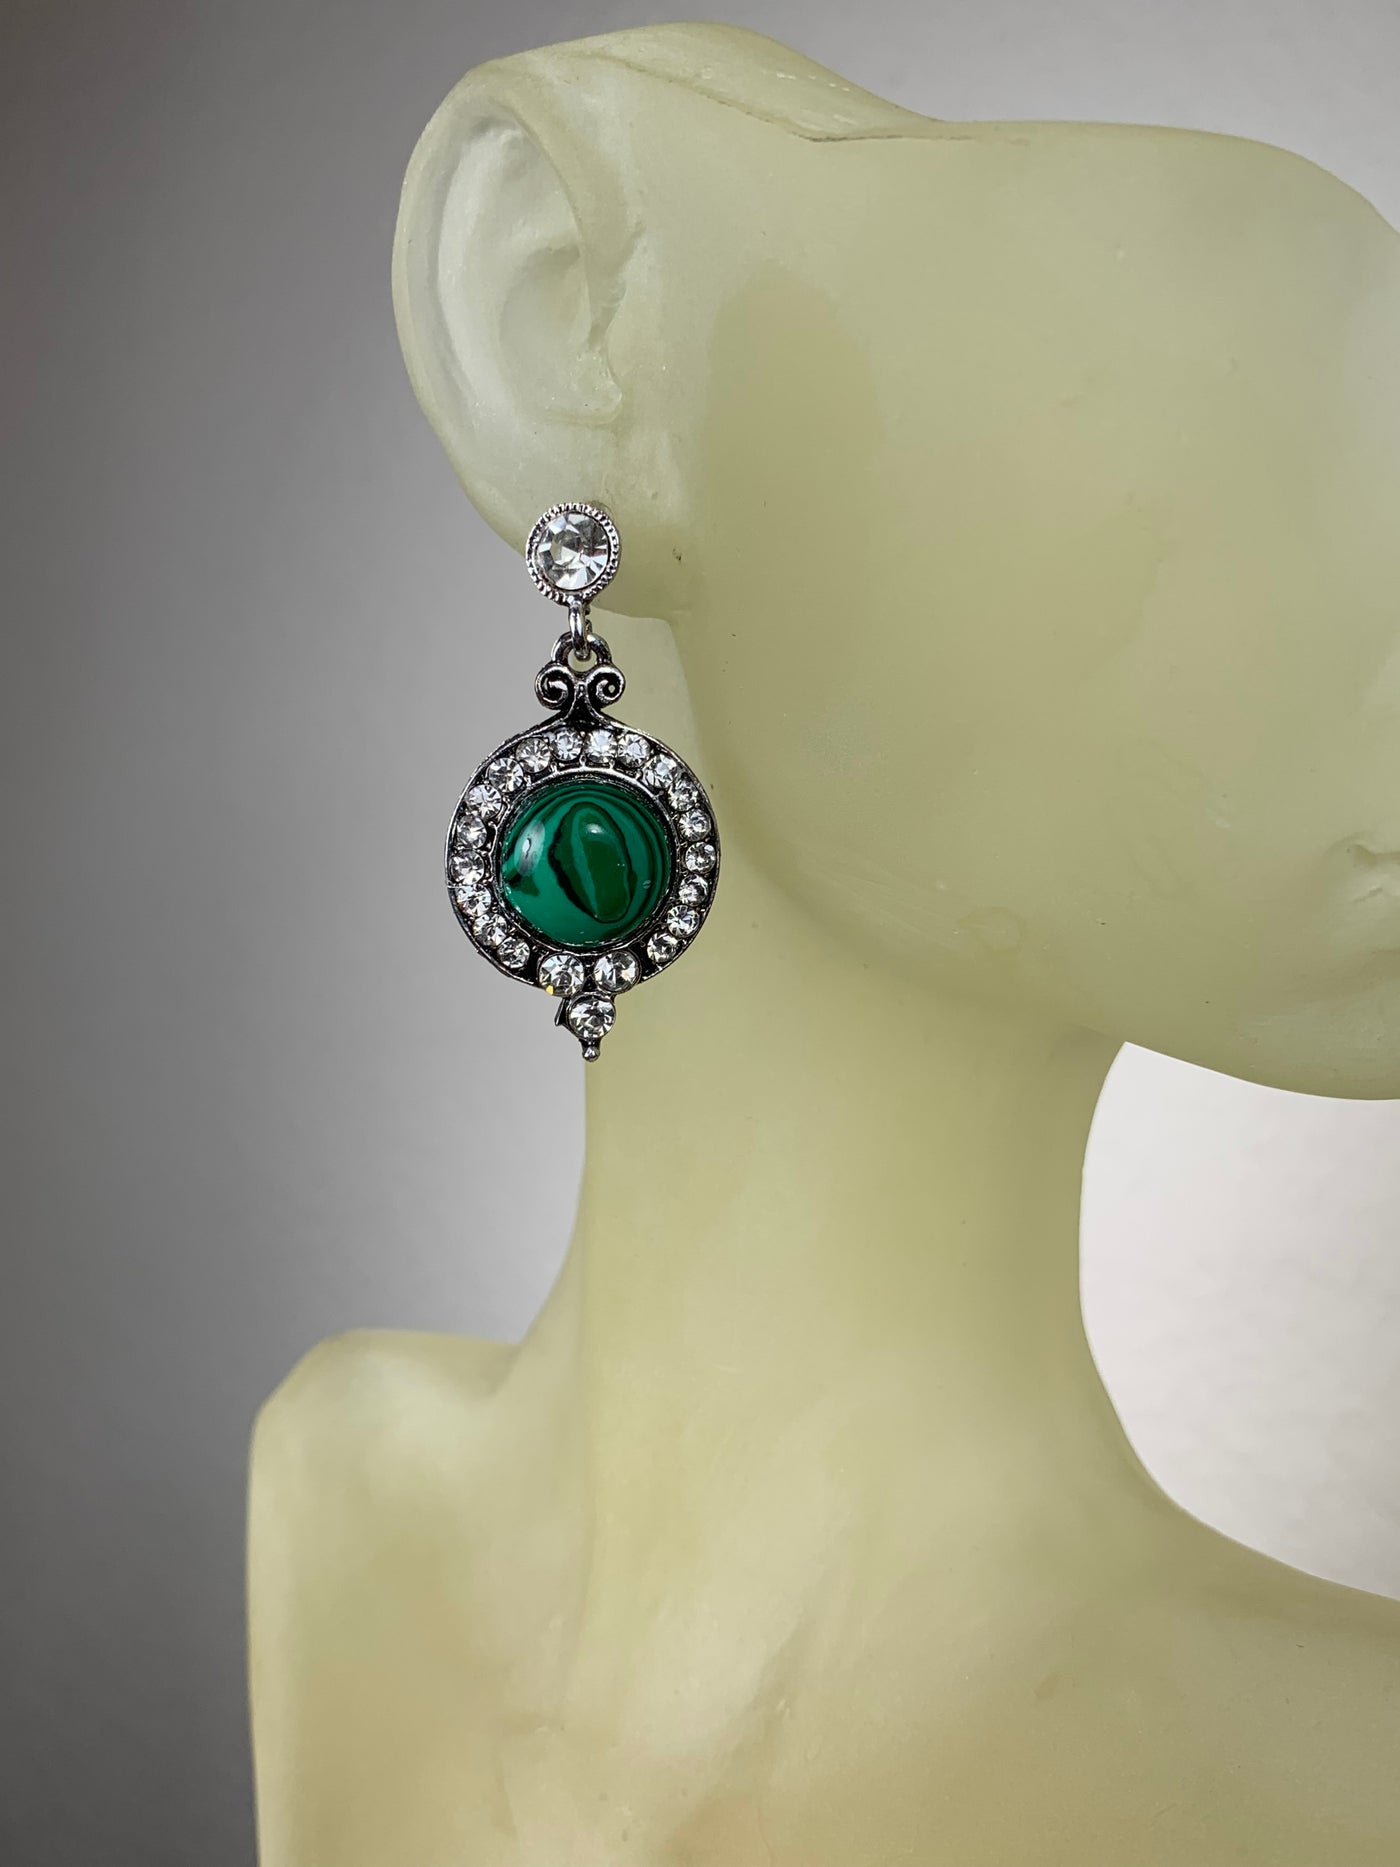 Round Reconstituted Earrings Surrounded by Crystals in Turquoise Malachite Gold Sand Stone & Amethyst